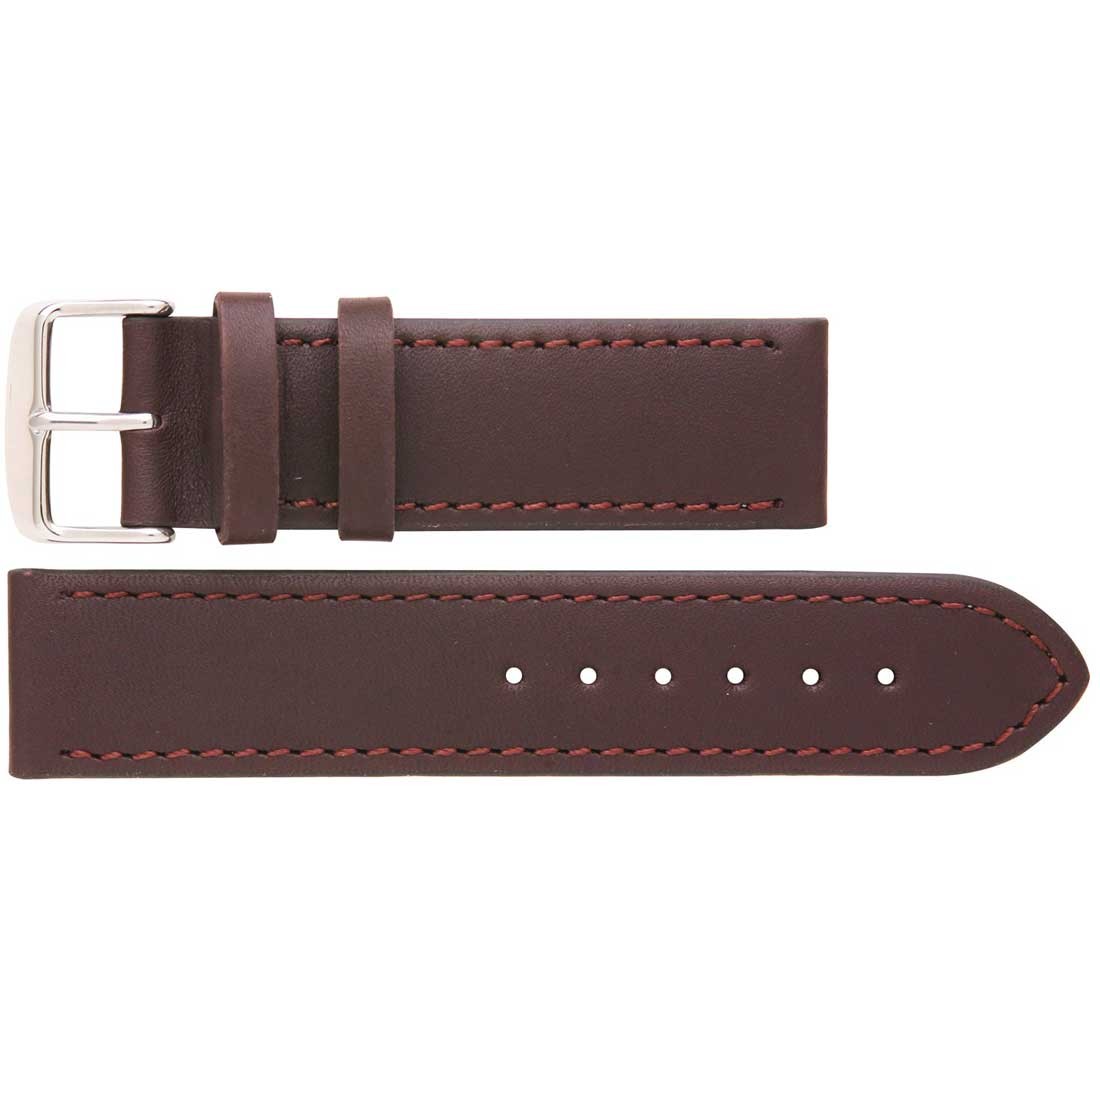 Banda No. 512 Smooth Waterproof Fine Leather Straps (12mm~24mm)